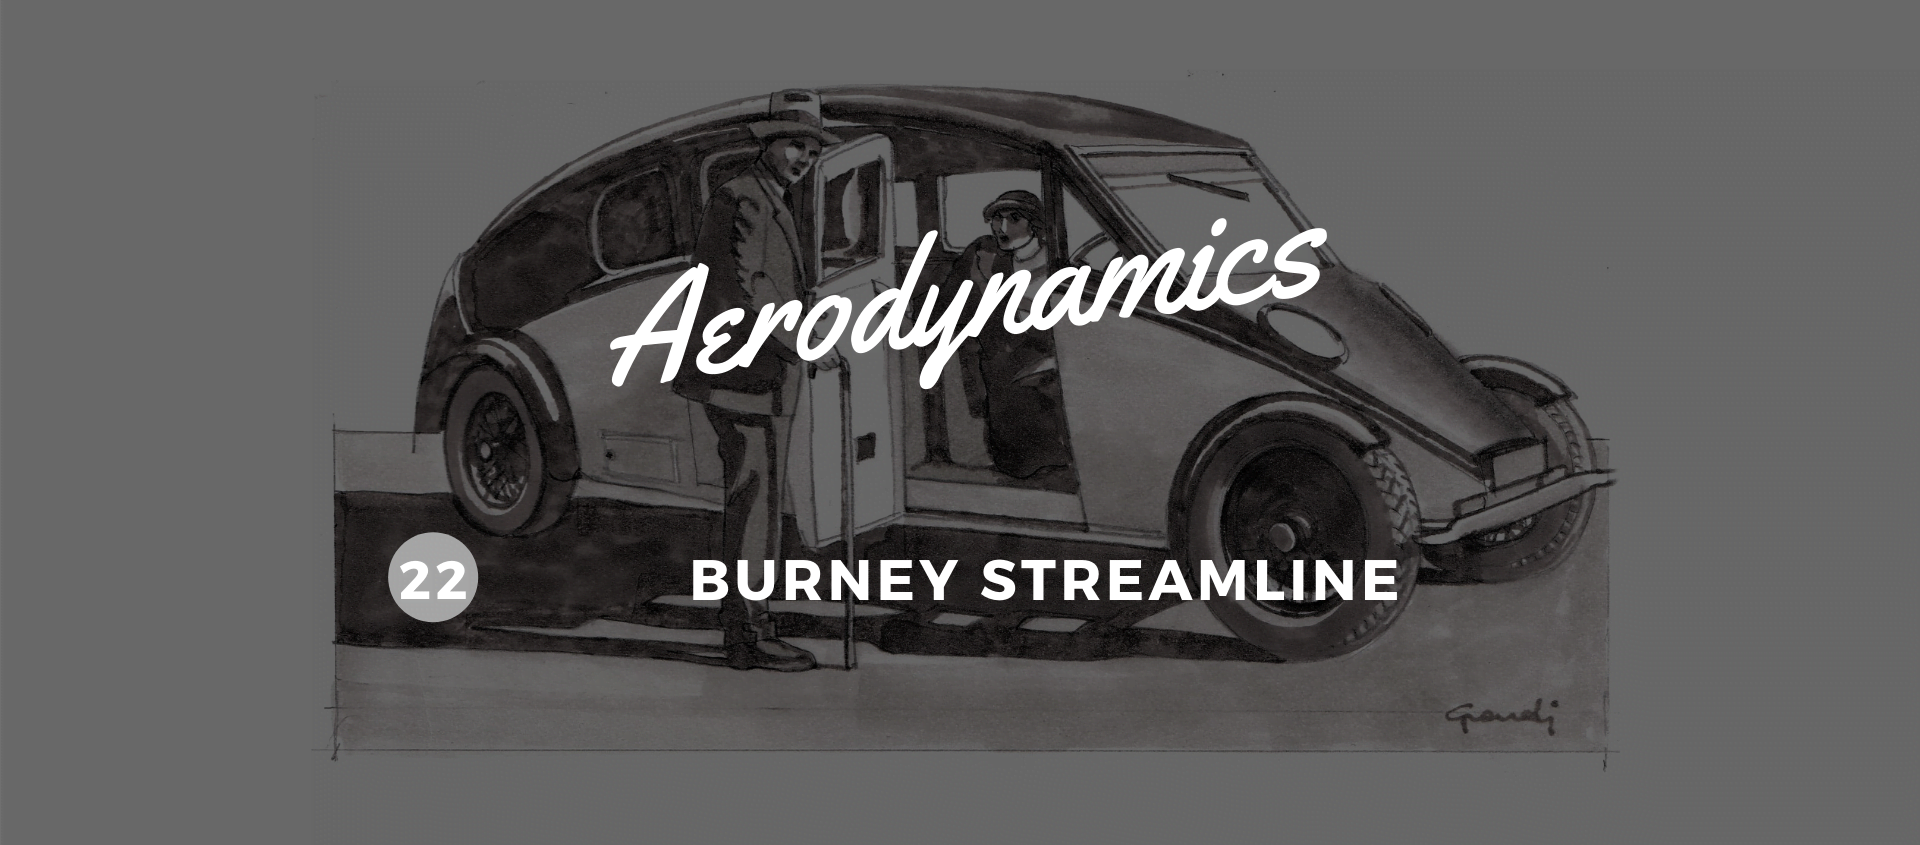 1929. Burney Streamline. The airship that never flew